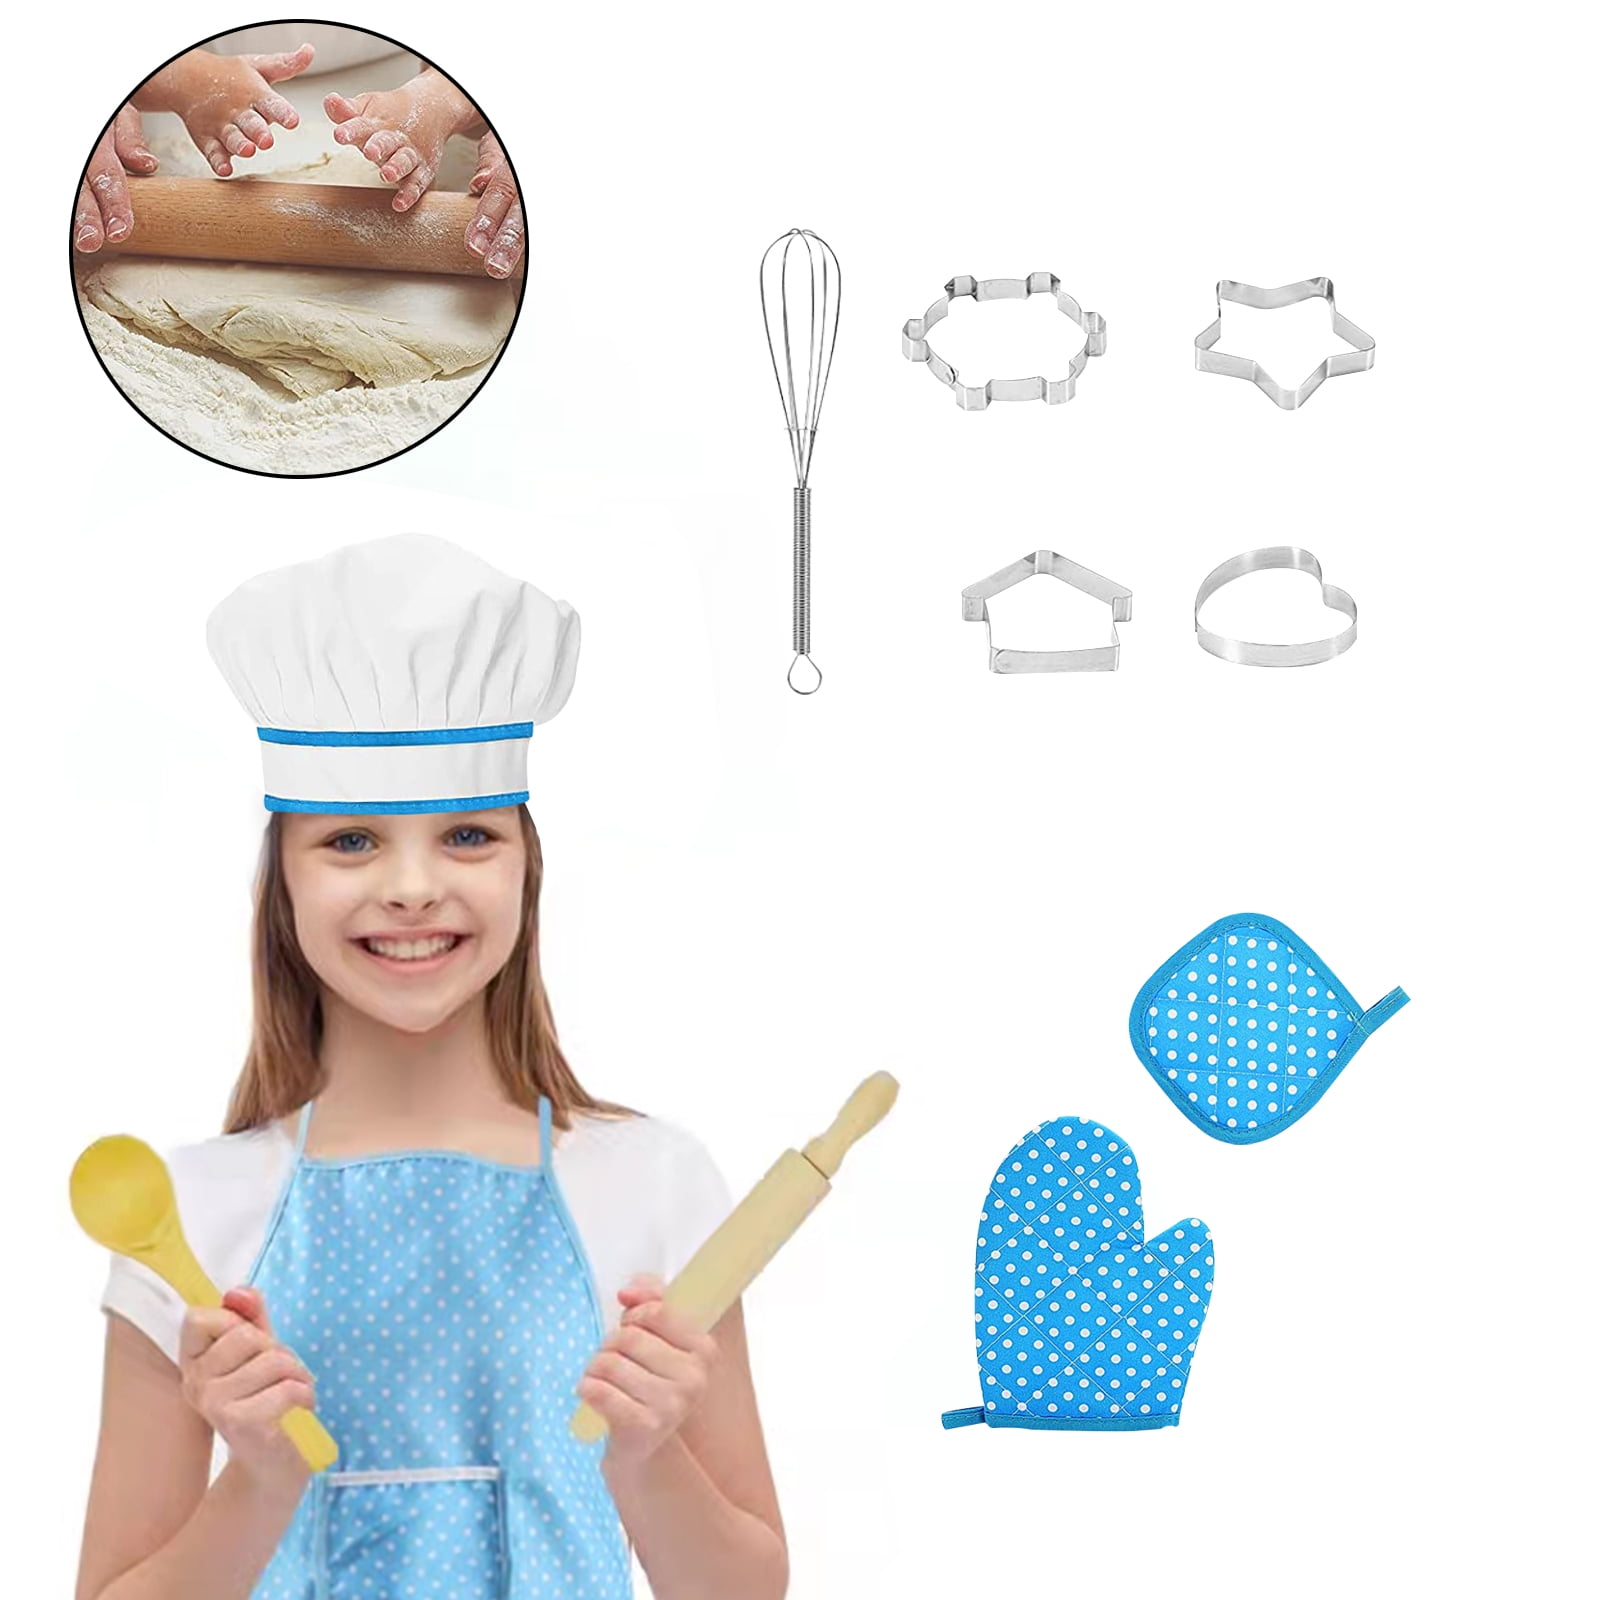 BOYS BLUE SPIDERMAN COOKING APRON AND CHEFS HAT GIFT SET SIZE AGE 3-8 YEARS 